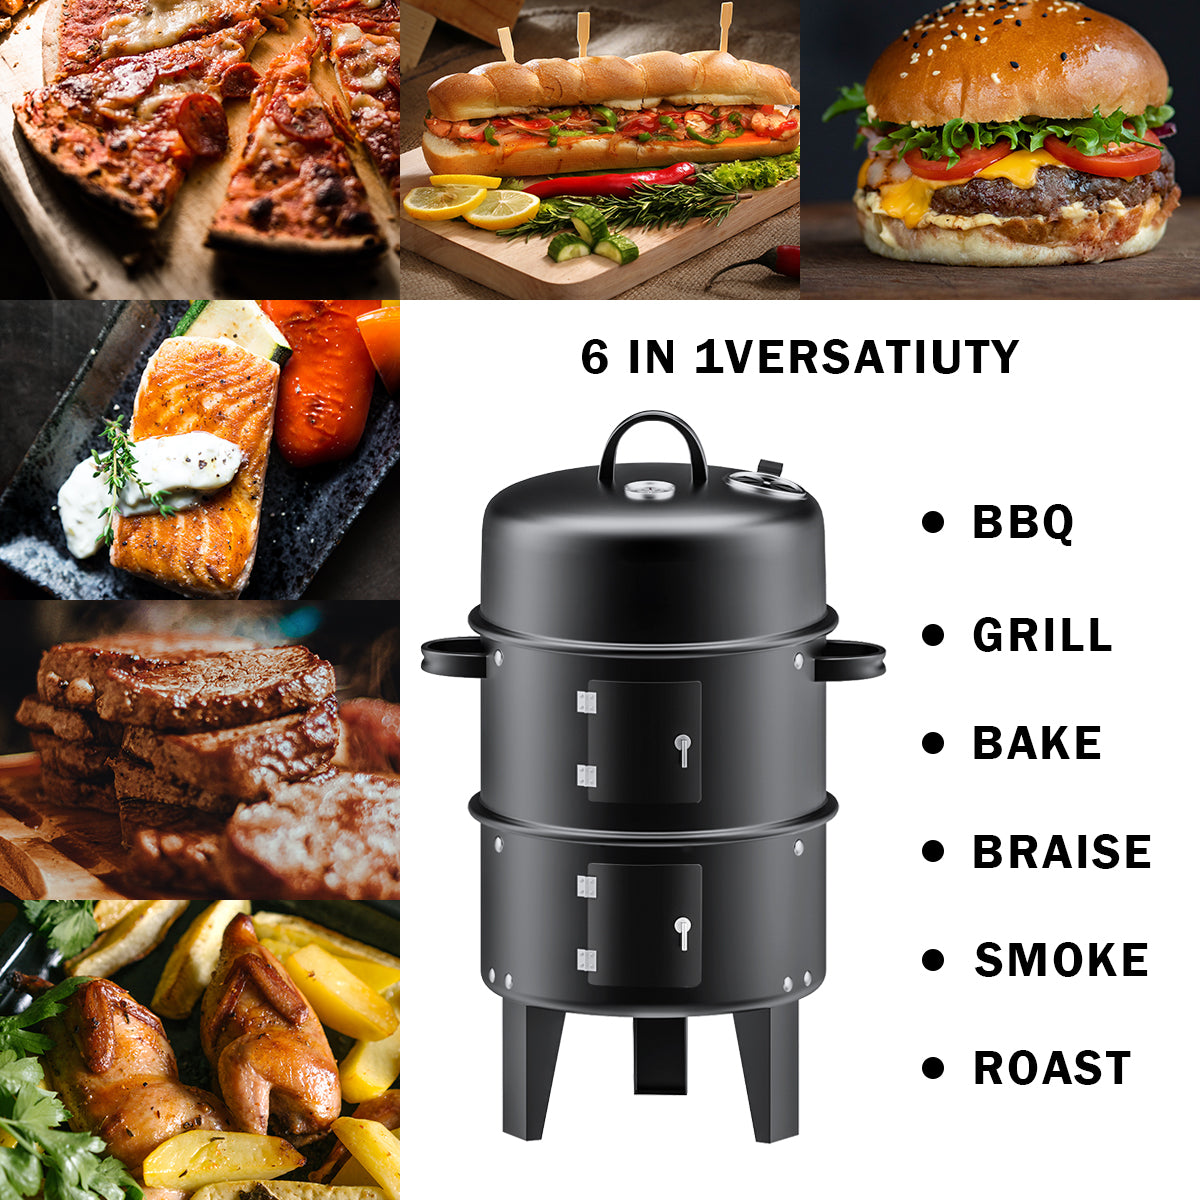 33 Smoker inch BBQ Vertical – hitowofficial Charcoal Grill Steel Hitow